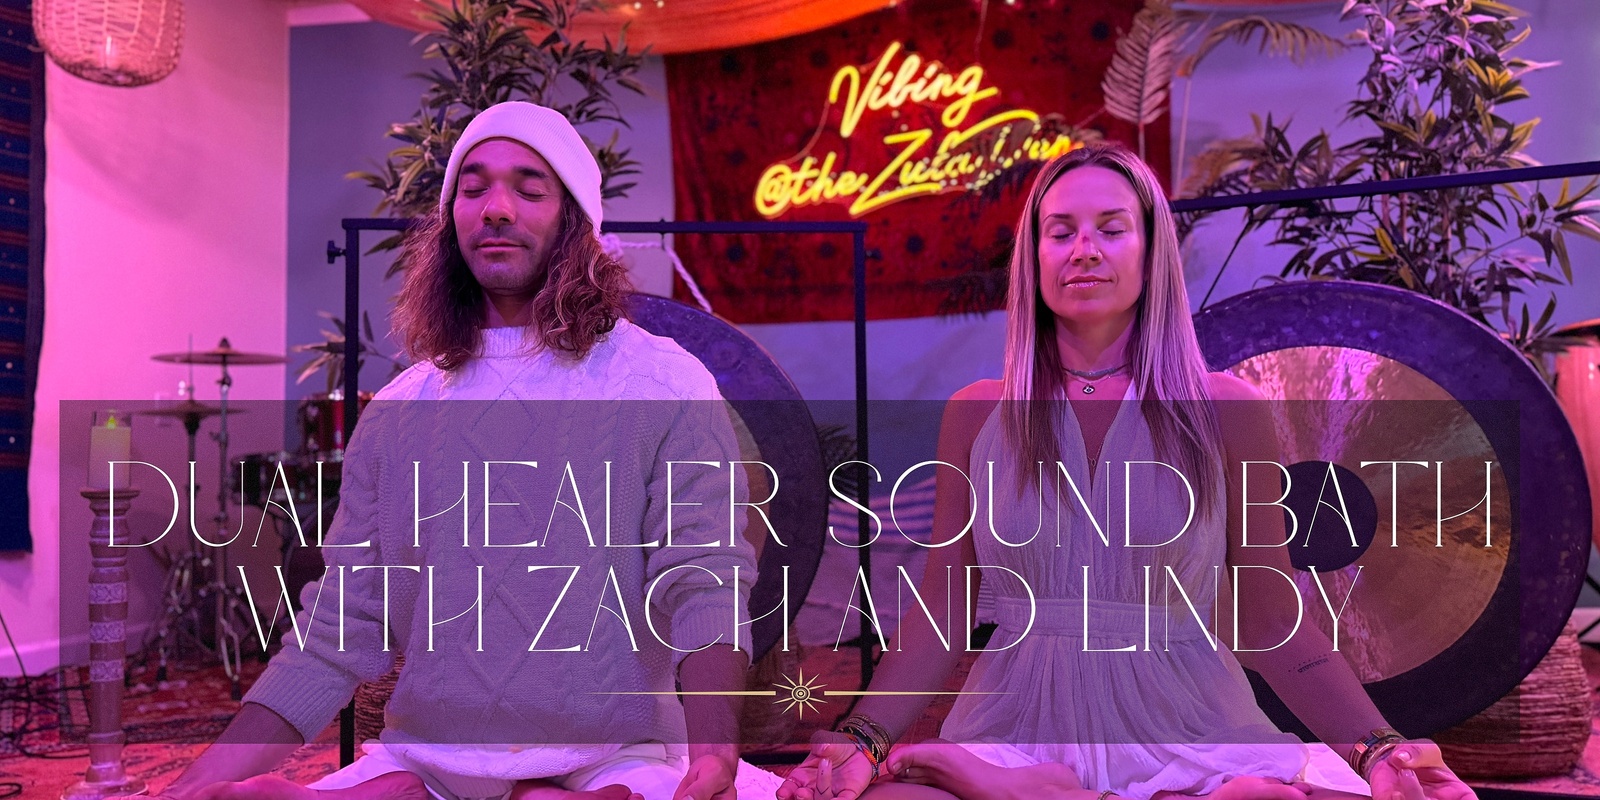 Banner image for Dual healer sound bath with Zach and Lindy 